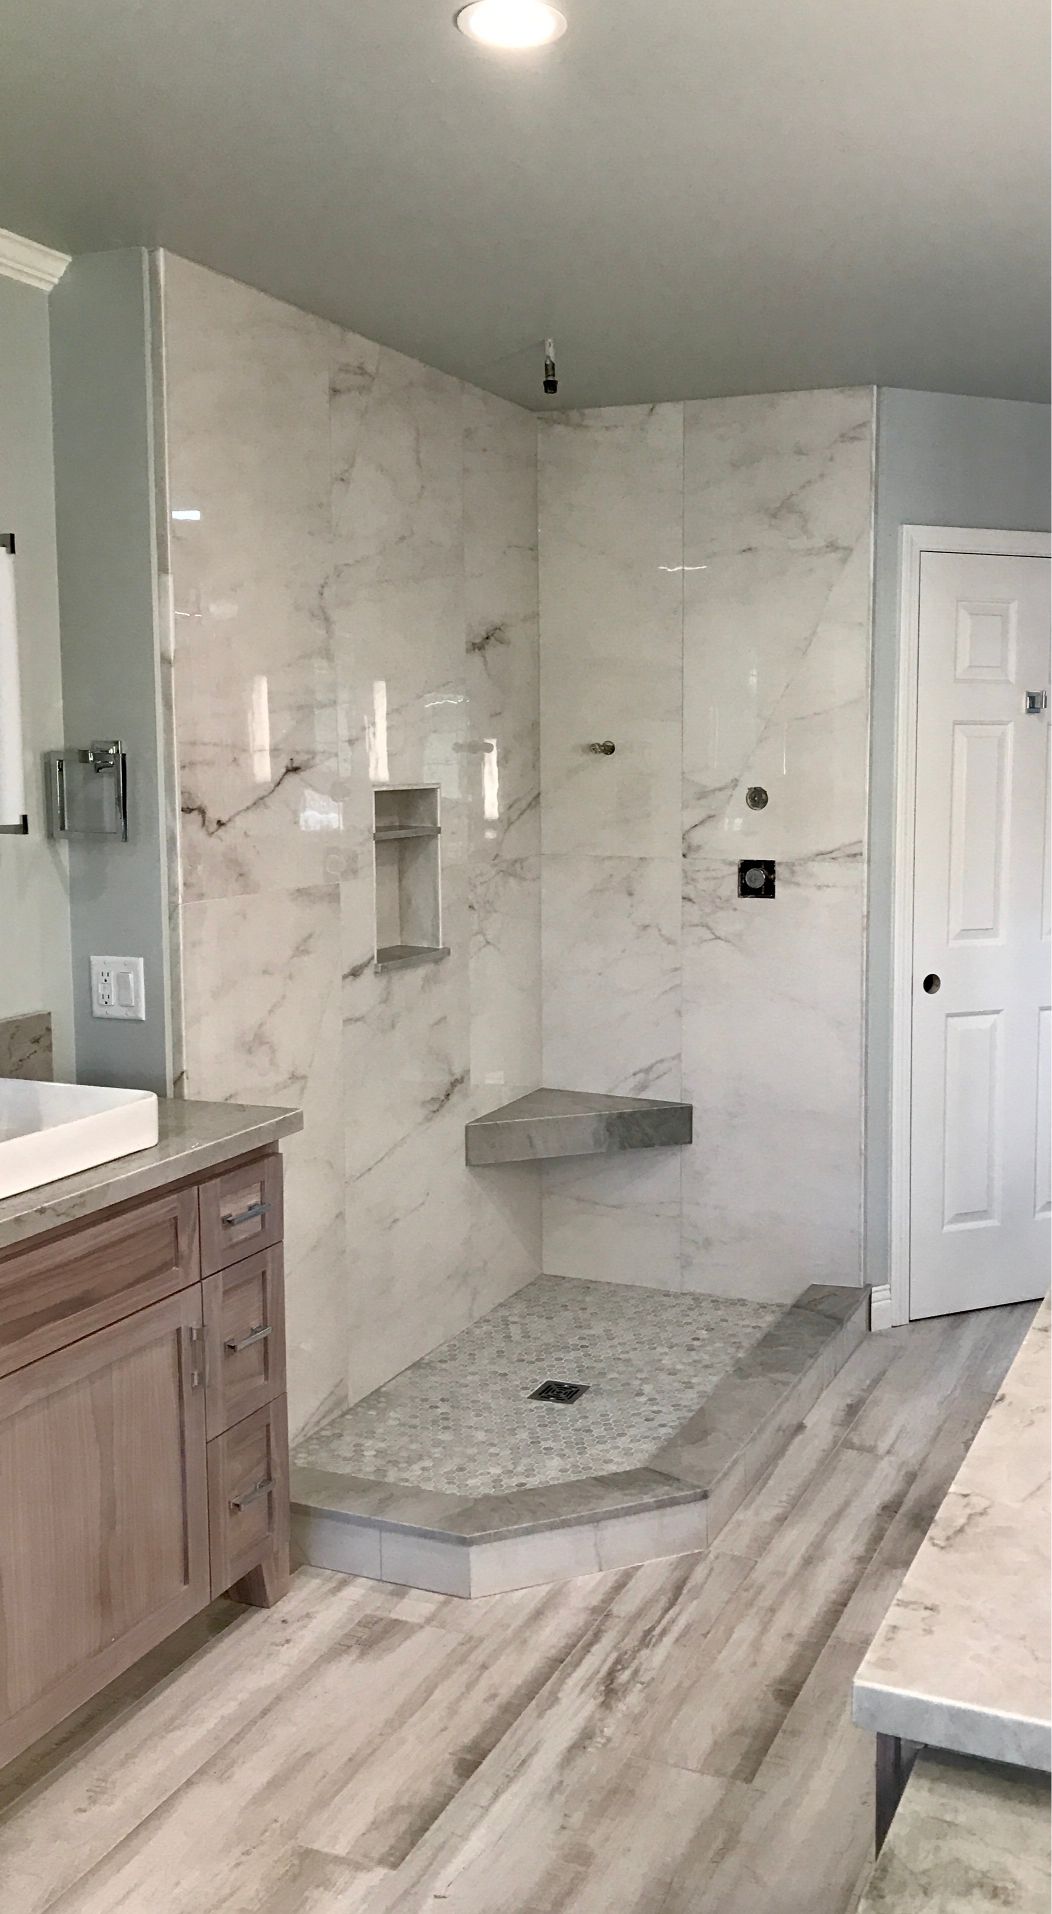 A professional tile installer in San Luis Obispo County, CA installed this gorgeous marble shower with a bench seat. The shower floor has penny mosaic tile in various shades of gray.